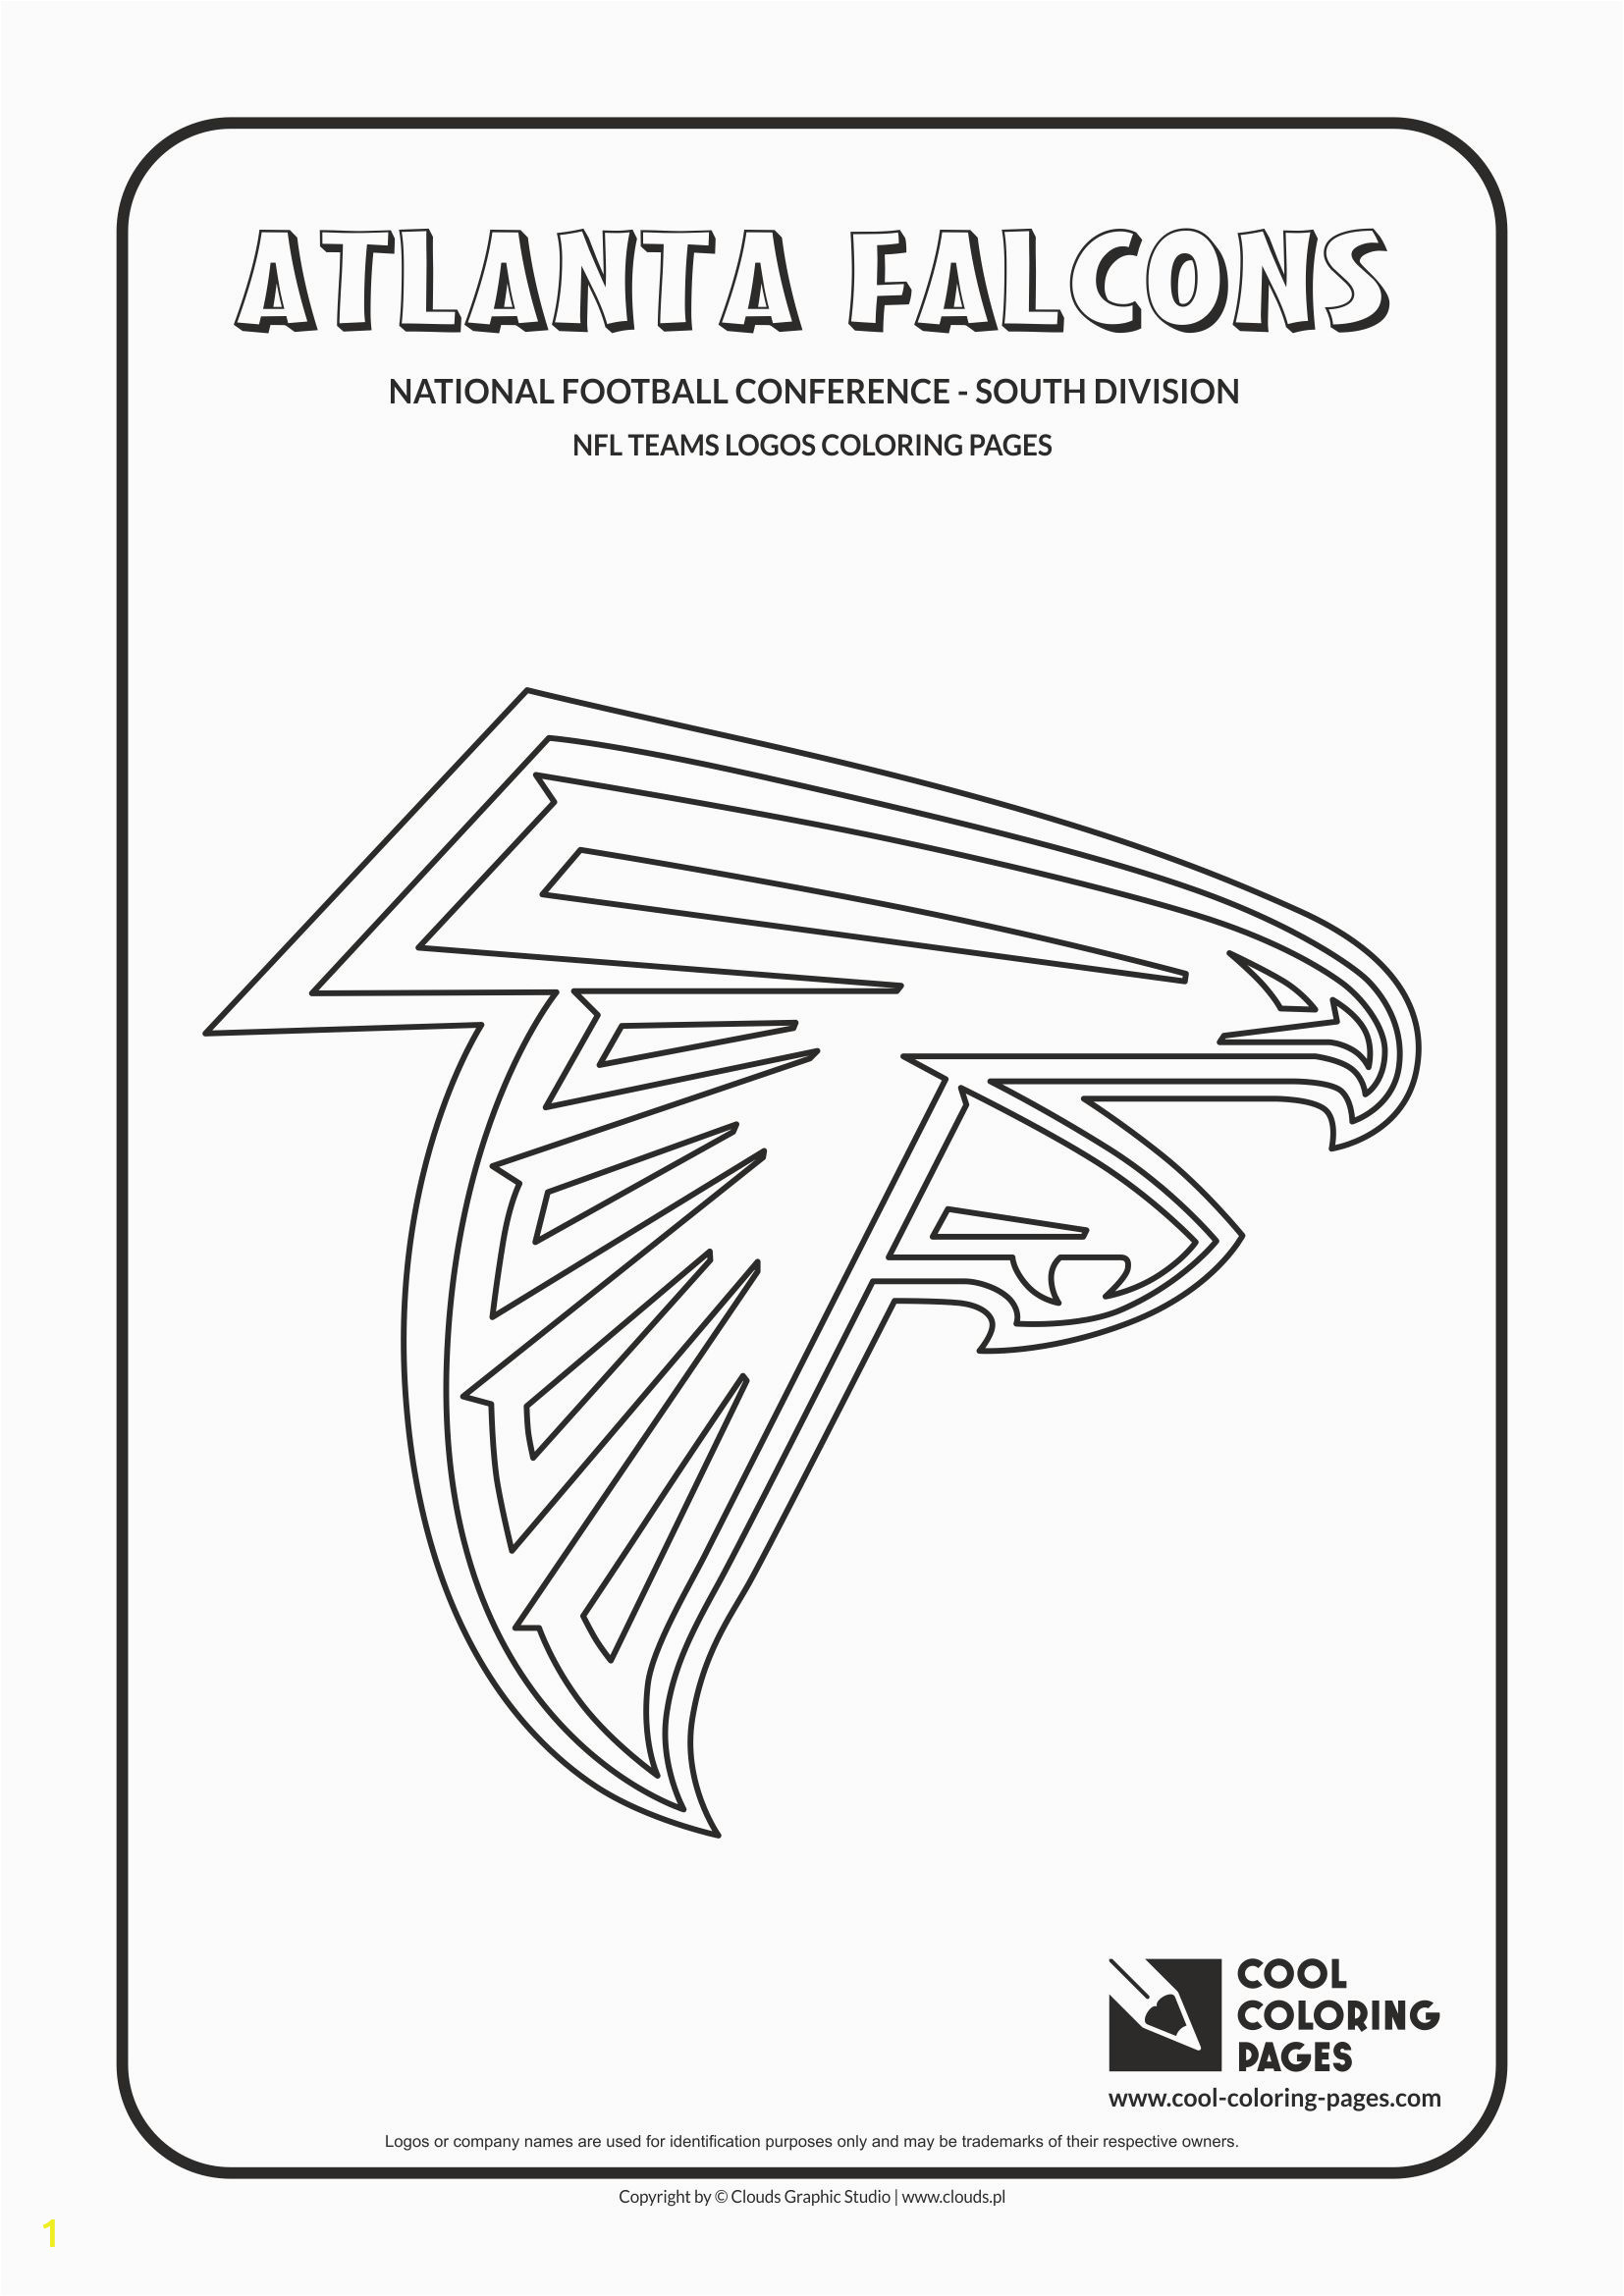 774ab30ac8931b1f78d ee3a065 cool coloring pages nfl teams logos coloring pages cool coloring 1654 2339